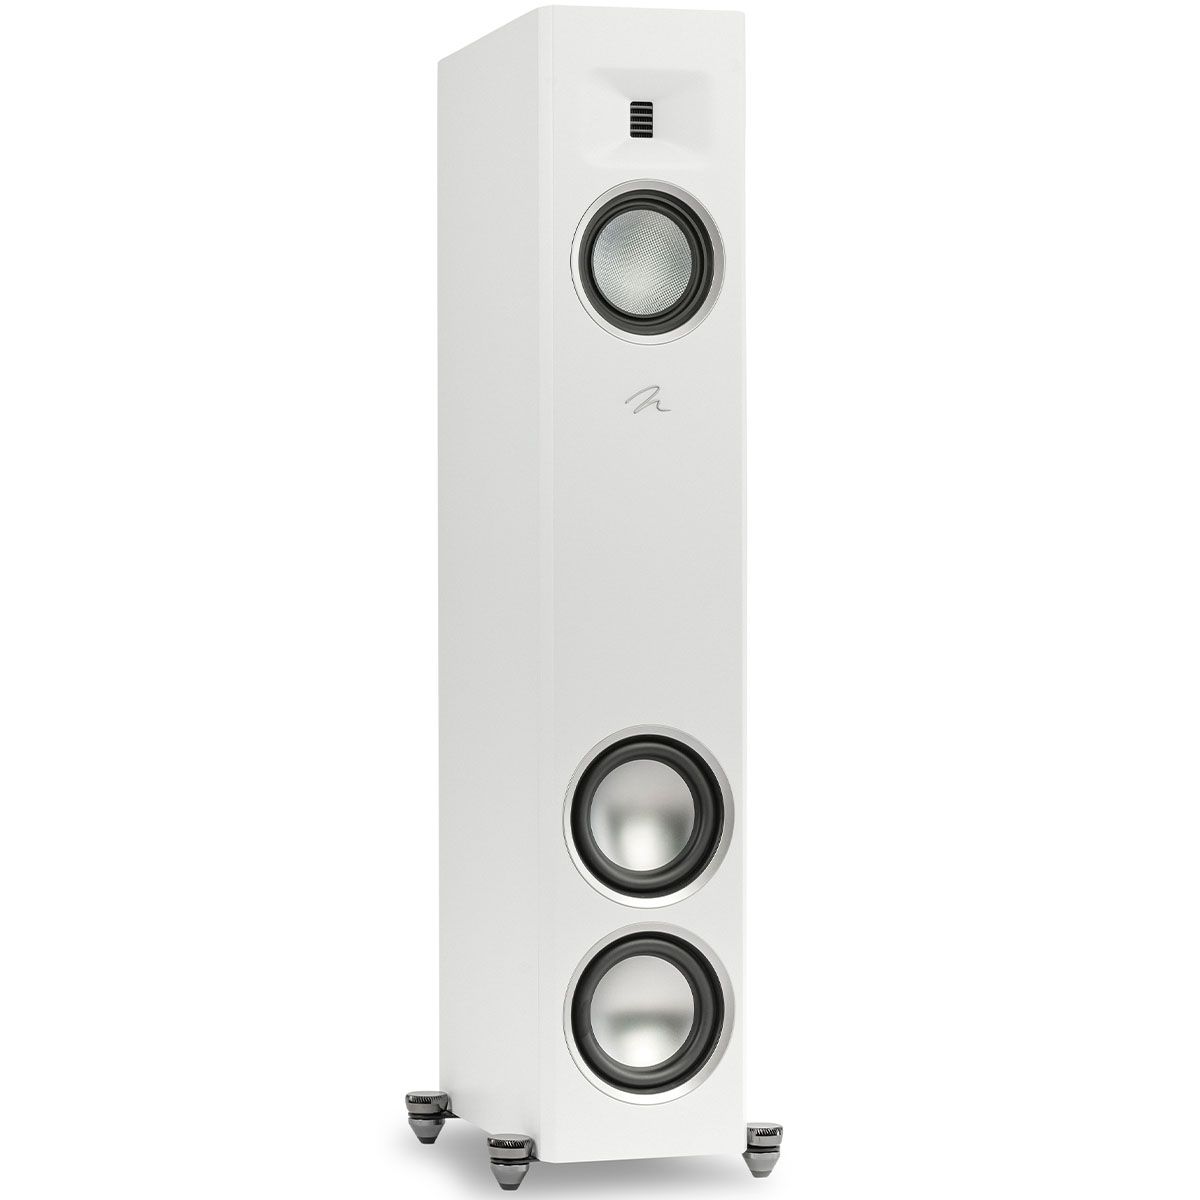 MartinLogan Motion XT F20  Floorstanding Speaker in white, angled view without grilles on white background